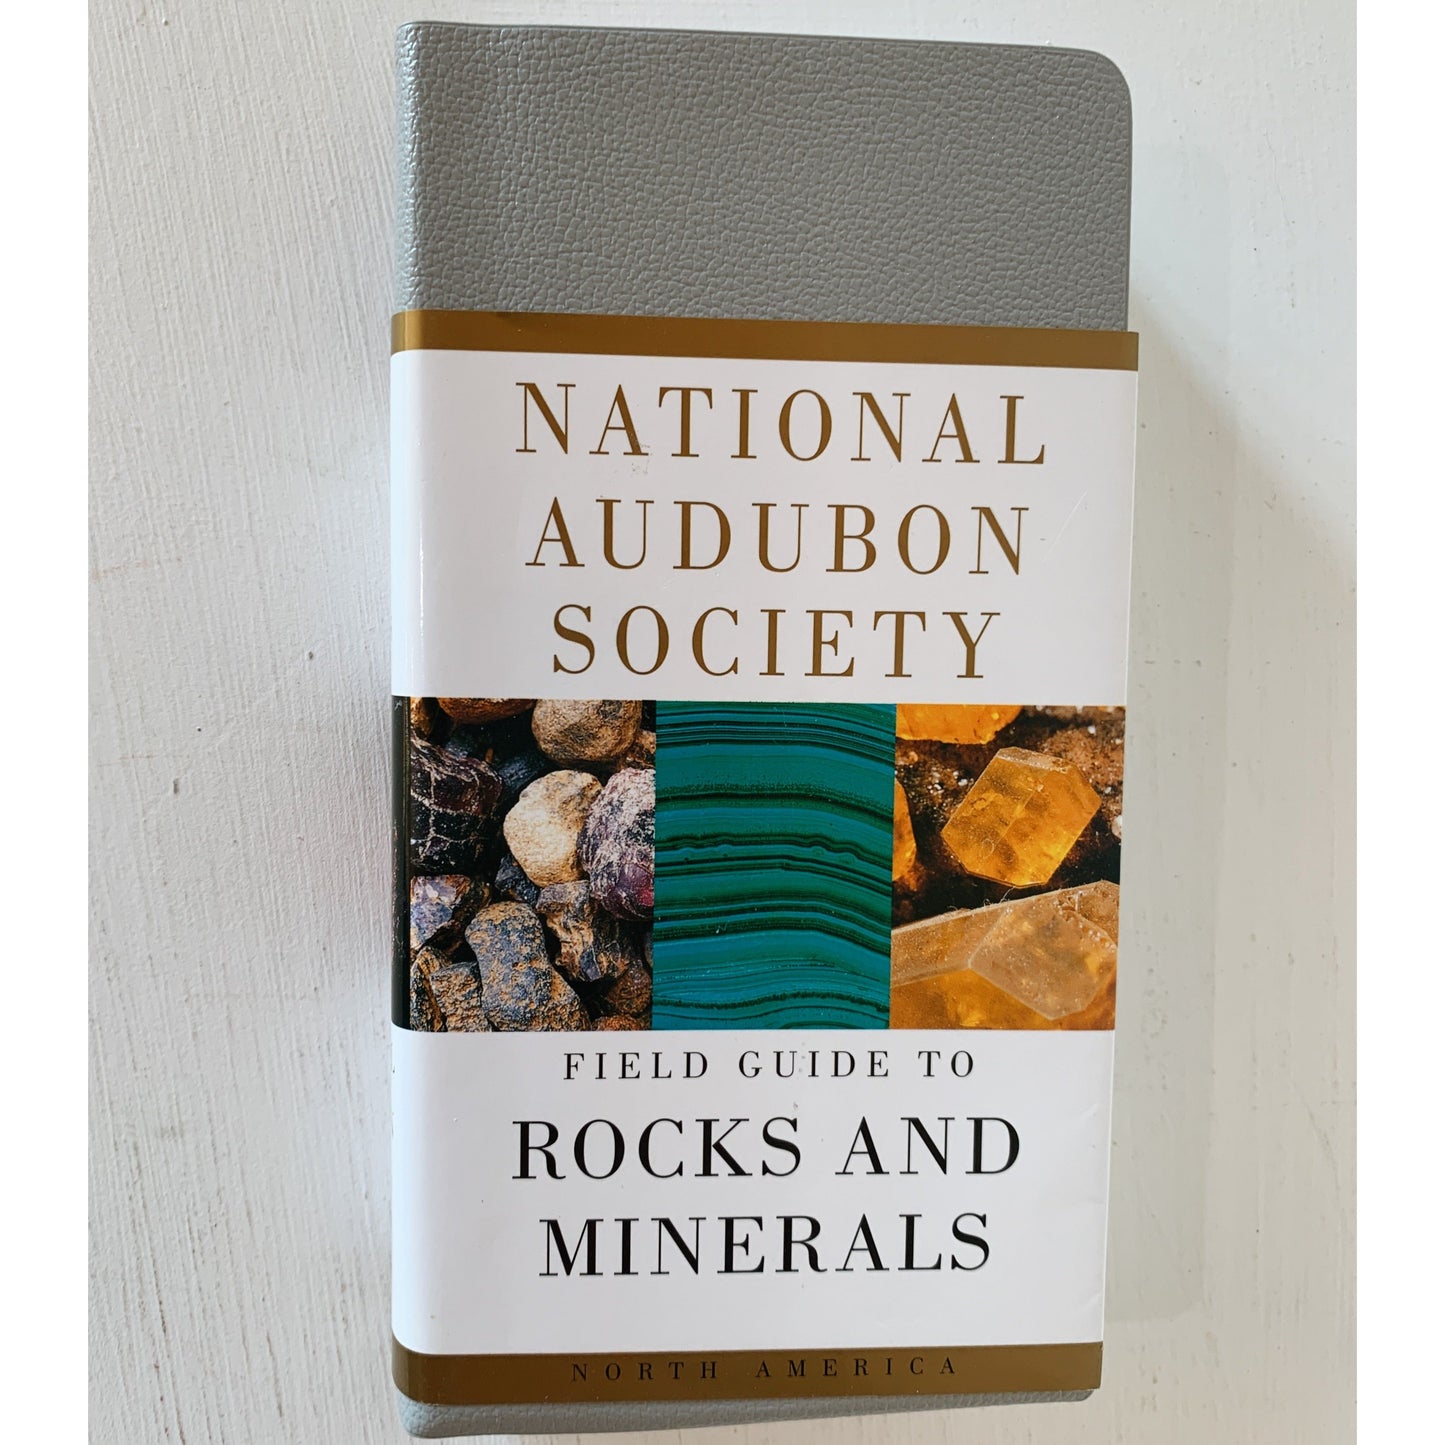 National Audubon Society Field Guide to Rocks and Minerals, 1979